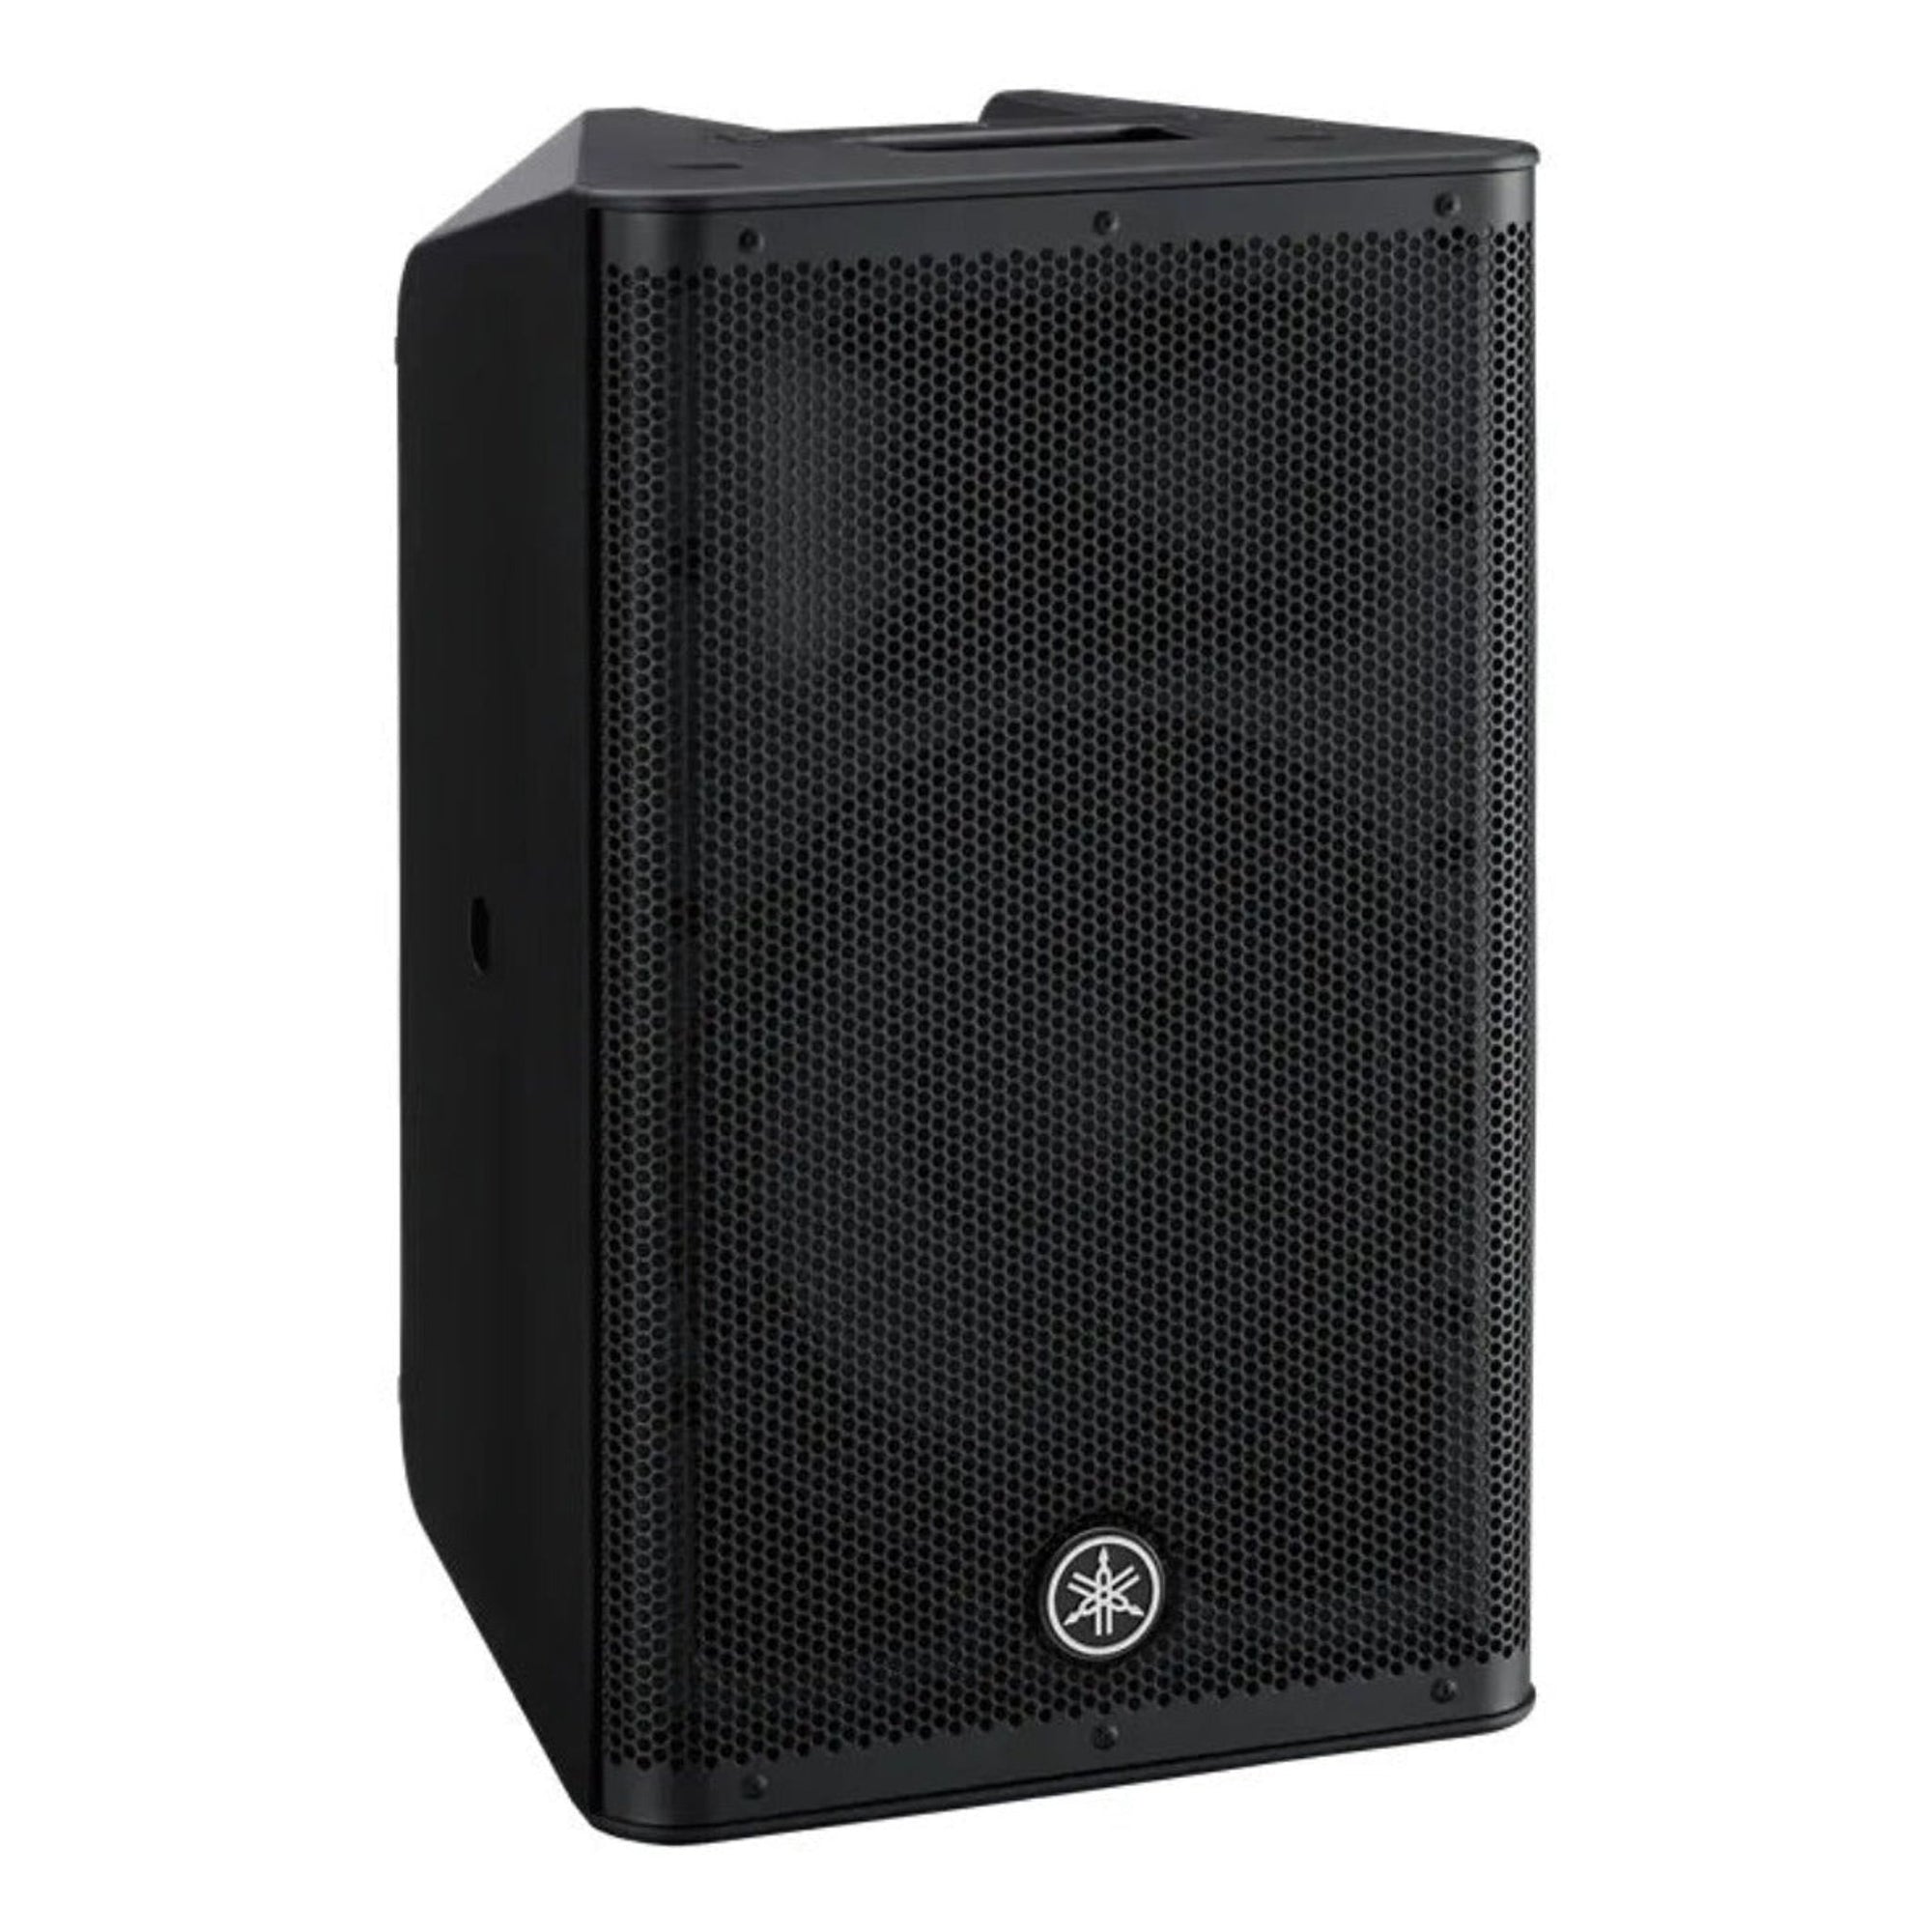 Since its inception, the Yamaha DXR Active Speaker Series has long signified a confluence of raw power and technological innovation that reliably harnesses and delivers impressively high output with superior quality and clarity